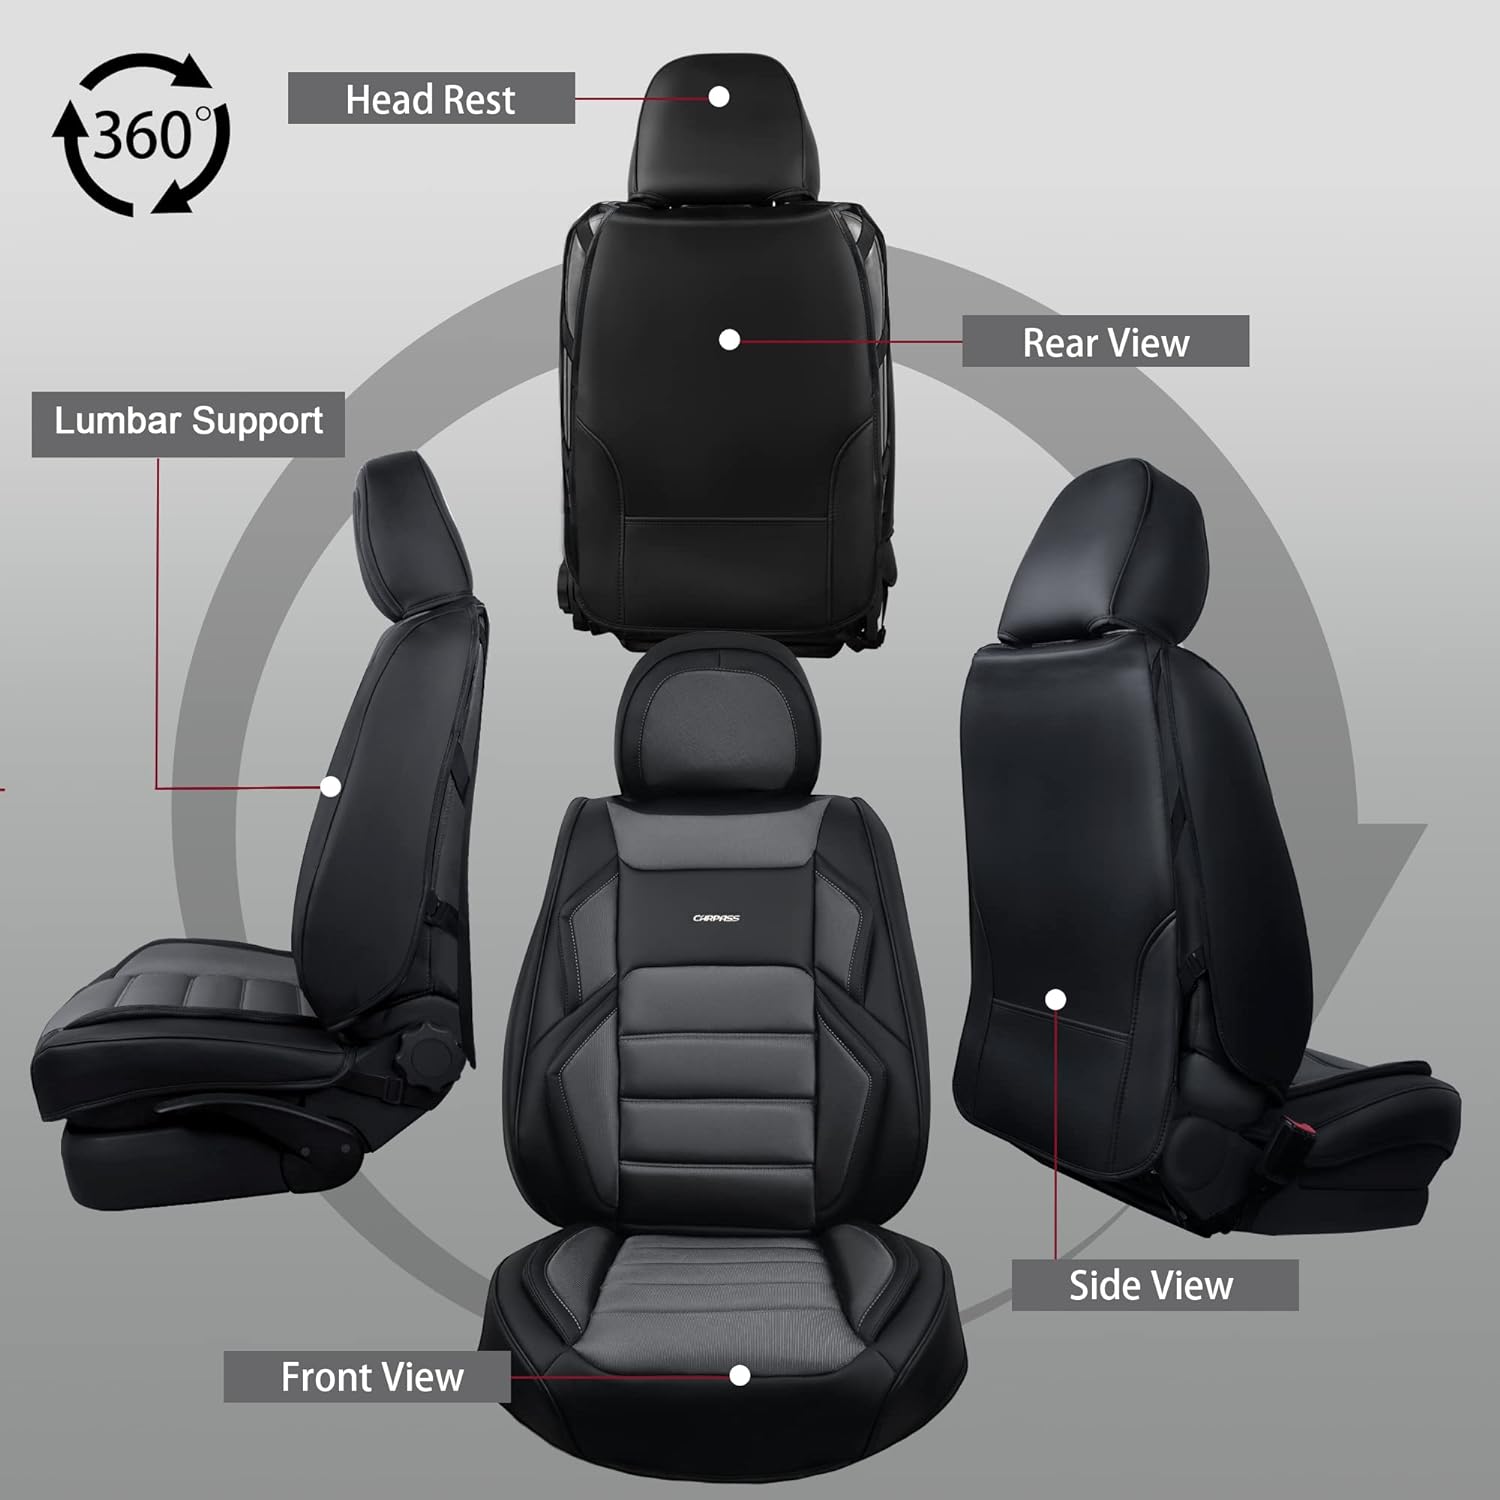 CAR PASS Nappa Leather Car Seat Covers Full Set, 5 Seats Universal Seat Covers for Cars, Waterproof Luxury Lumbar Support Front and Rear Seat Cover for Sedan SUV Pick-up Truck, Black Rainbow Chameleon